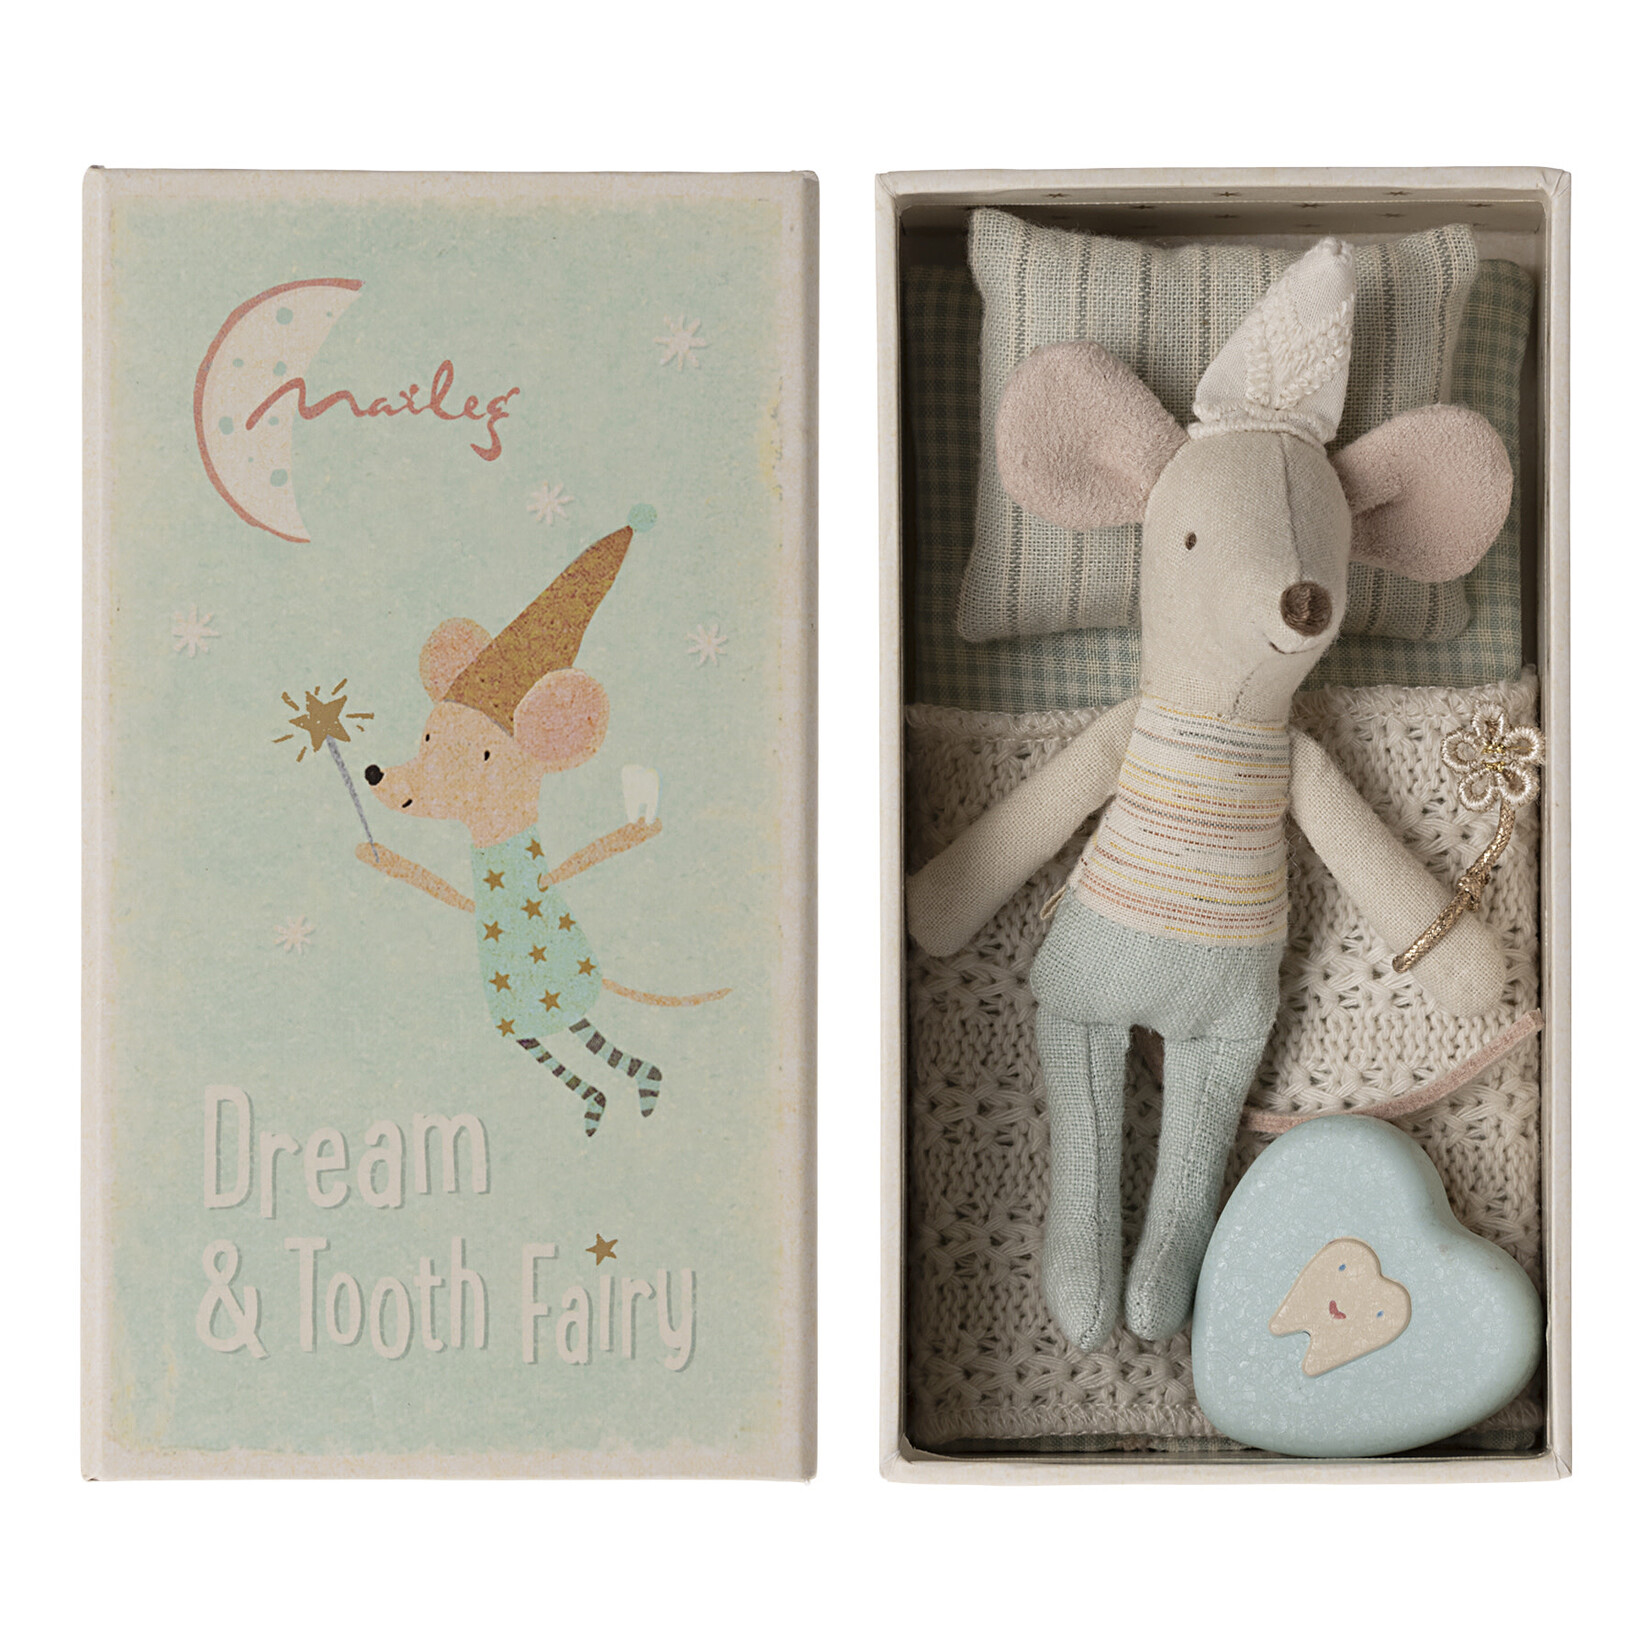 Maileg PRE ORDER Maileg Tooth fairy mouse Little brother in matchbox - Estimated arrival beginning June